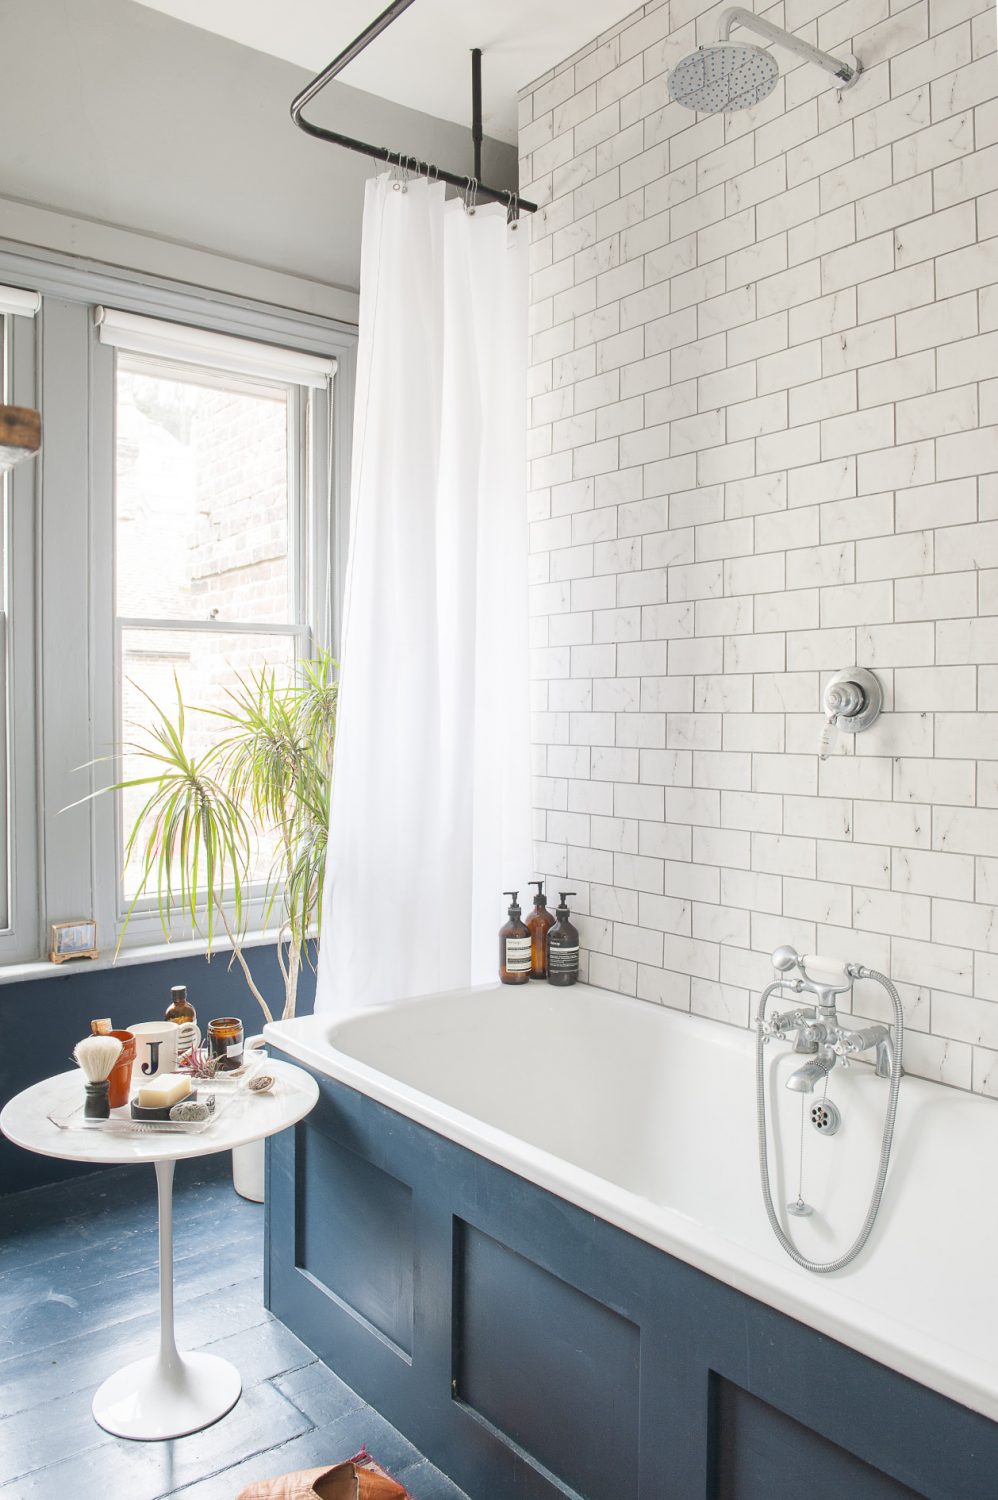 In the sparkling, 1930s-feel bathroom the floorboards are painted in the magnificent Hague Blue by Farrow & Ball.